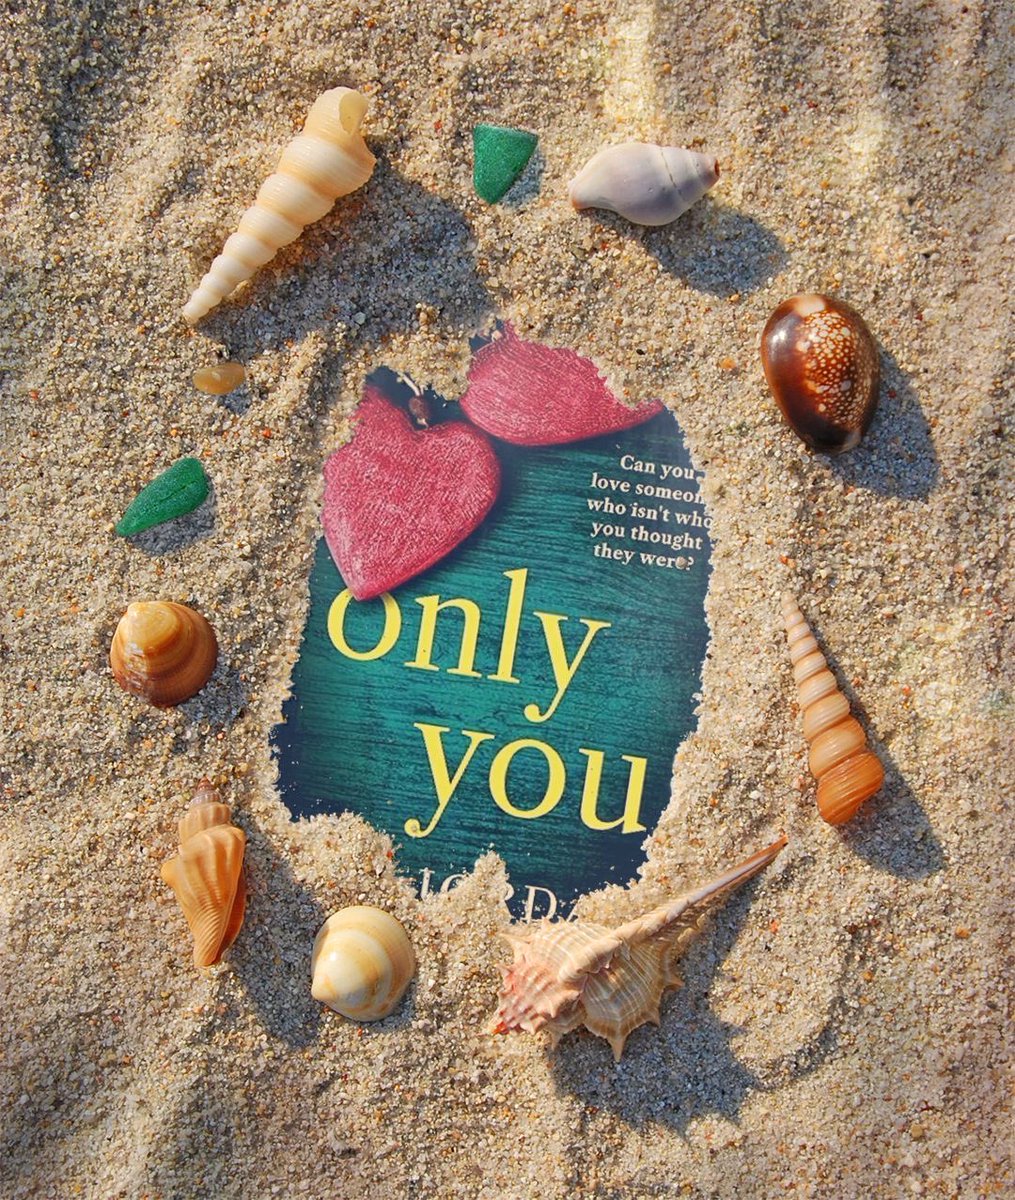 Looking to add to your #SummerReading collection? Only You is still ONLY £1.99 Or FREE on #KU “A beautiful #love #story about two people who were just meant to be.” #TuesNews #booklovers #booktwitter #bookboost @RNAtweets @Bloodhoundbook geni.us/OnlyYou_